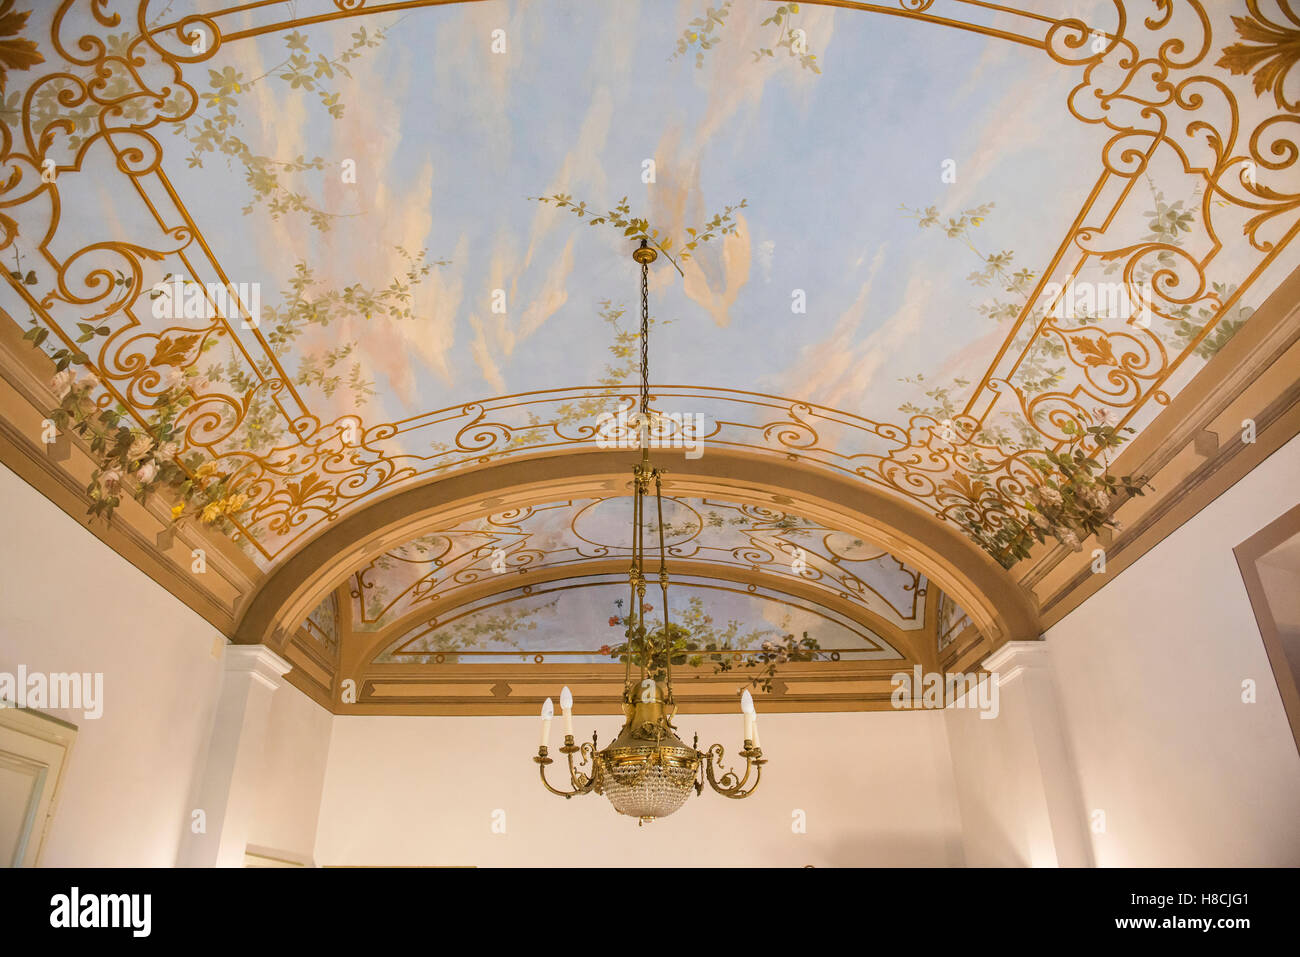 Interior of a Tuscan Villa with trompe l'oeil painted ceilings and walls in Italy Stock Photo